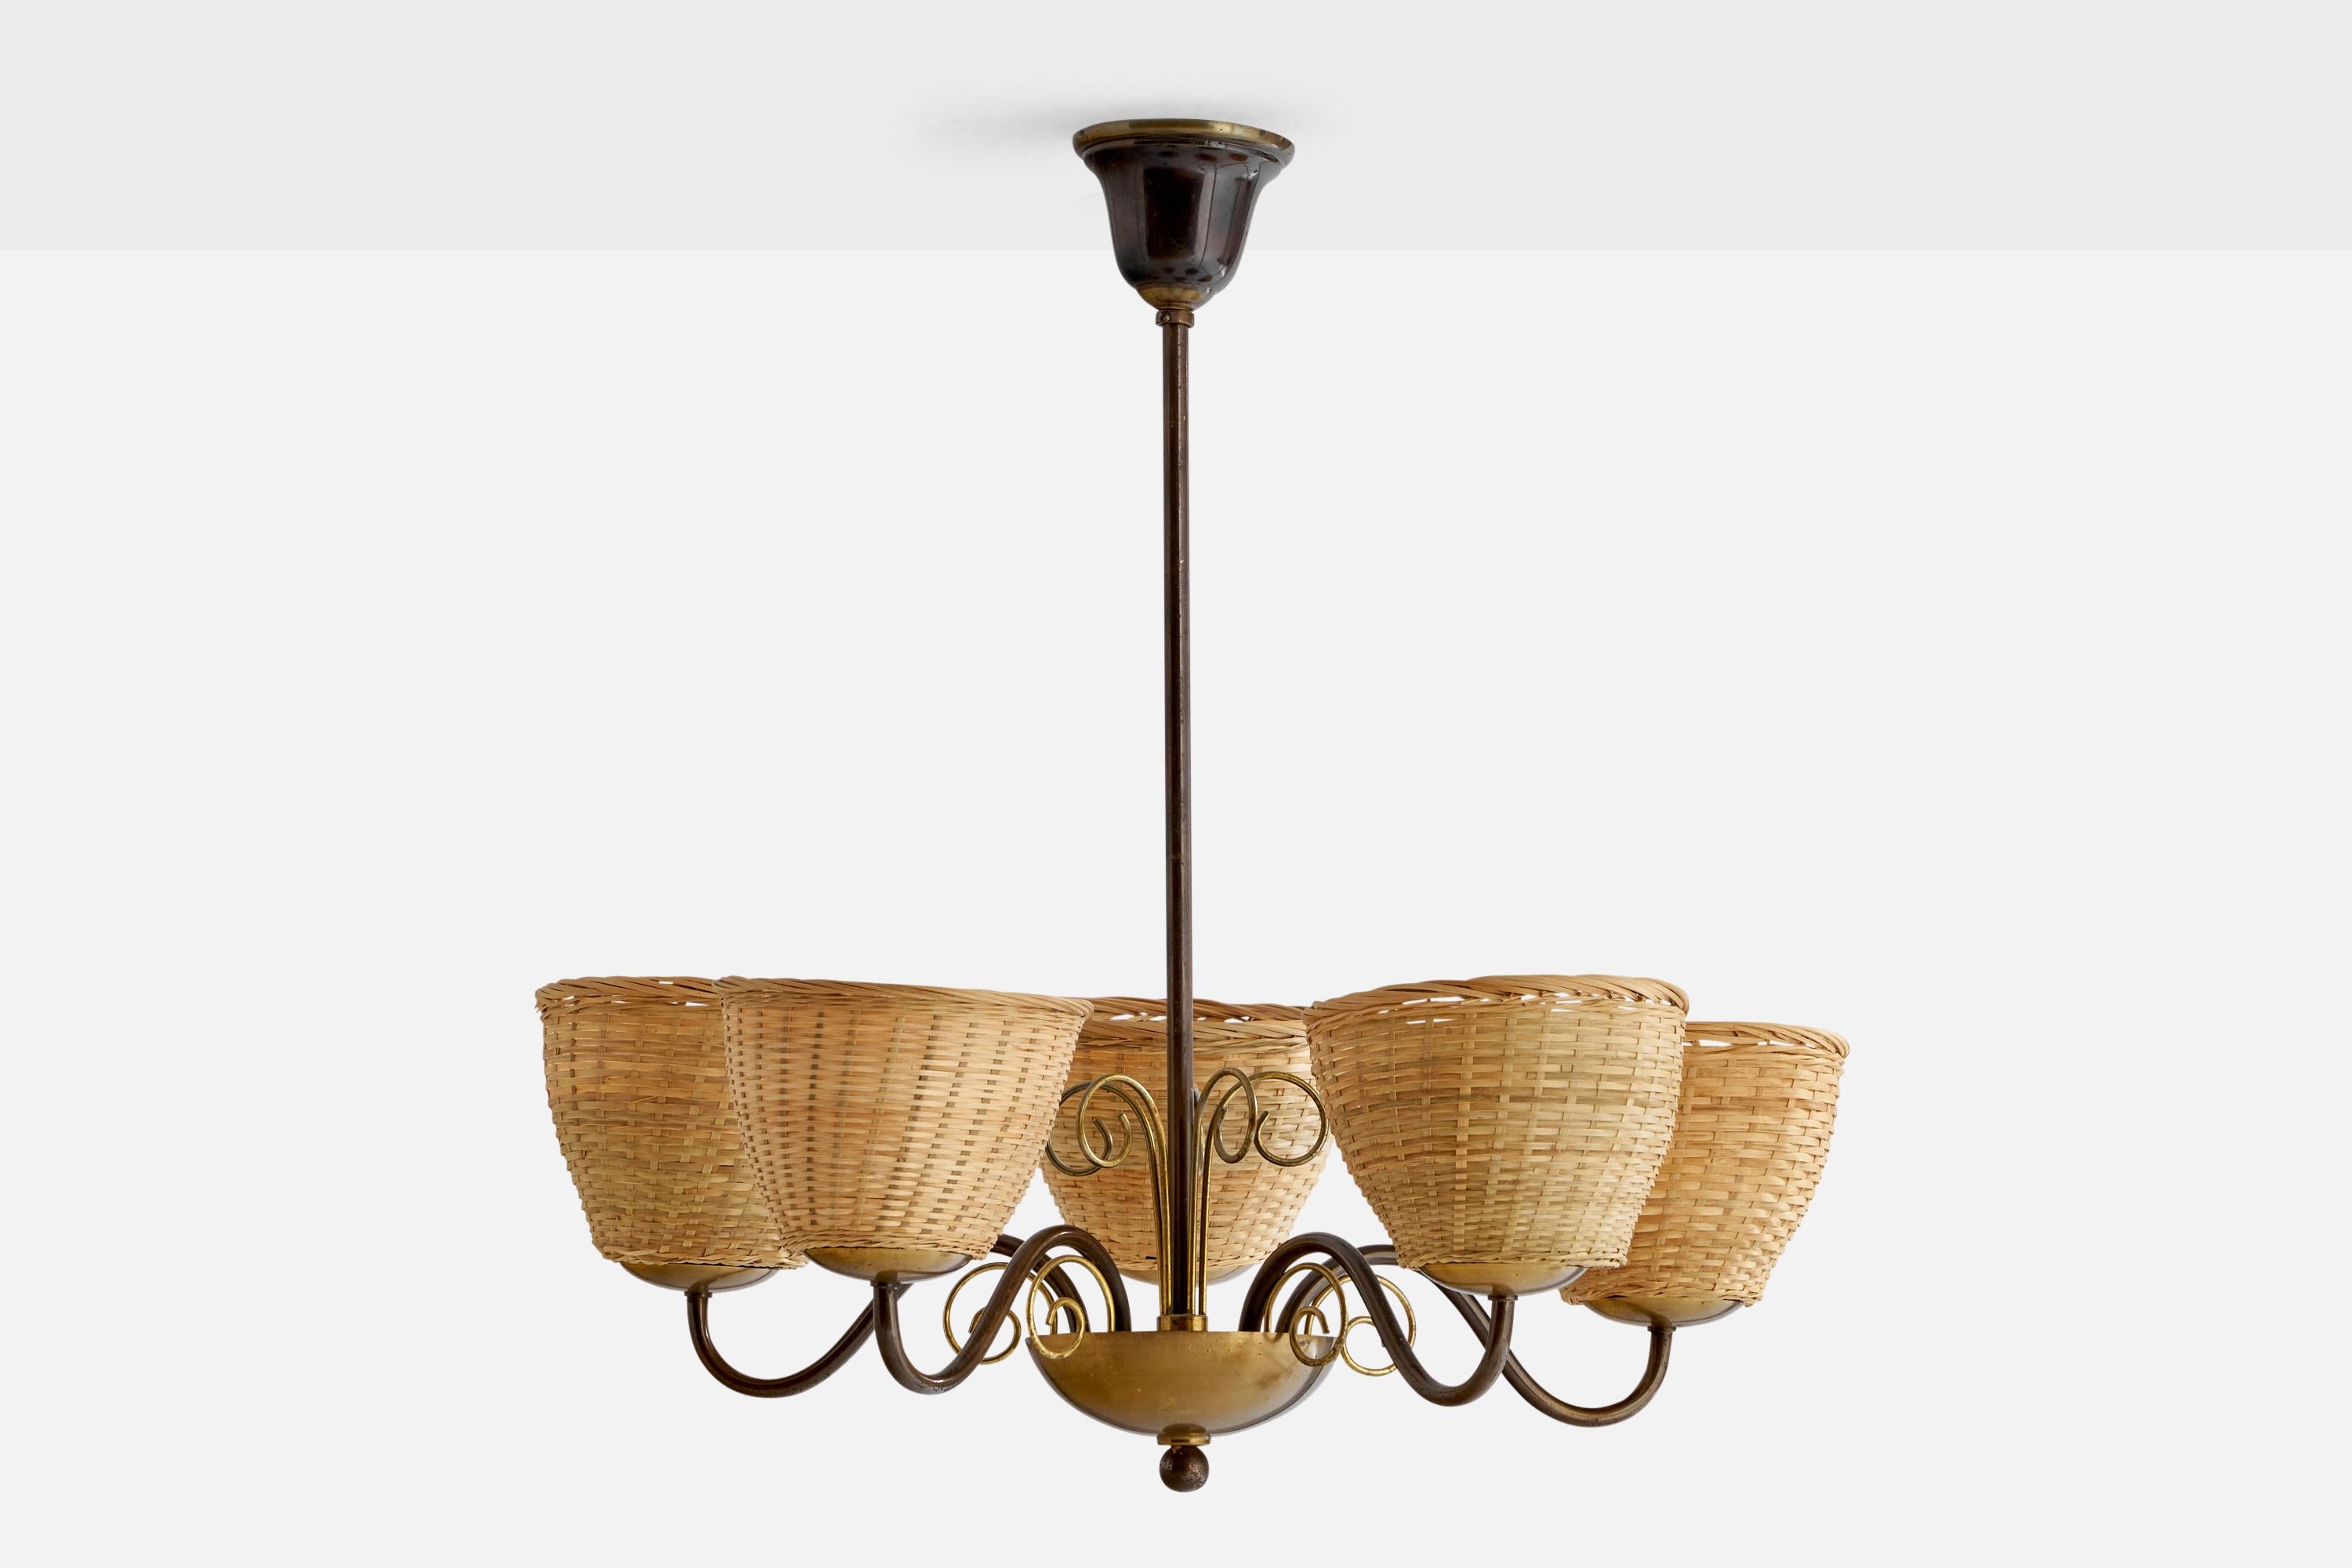 A five-armed brass and rattan chandelier designed and produced in Denmark, 1940s.

Dimensions of canopy (inches): 3.25” H x 4.25” Diameter
Socket takes standard E-26 bulbs. 5 sockets.There is no maximum wattage stated on the fixture. All lighting